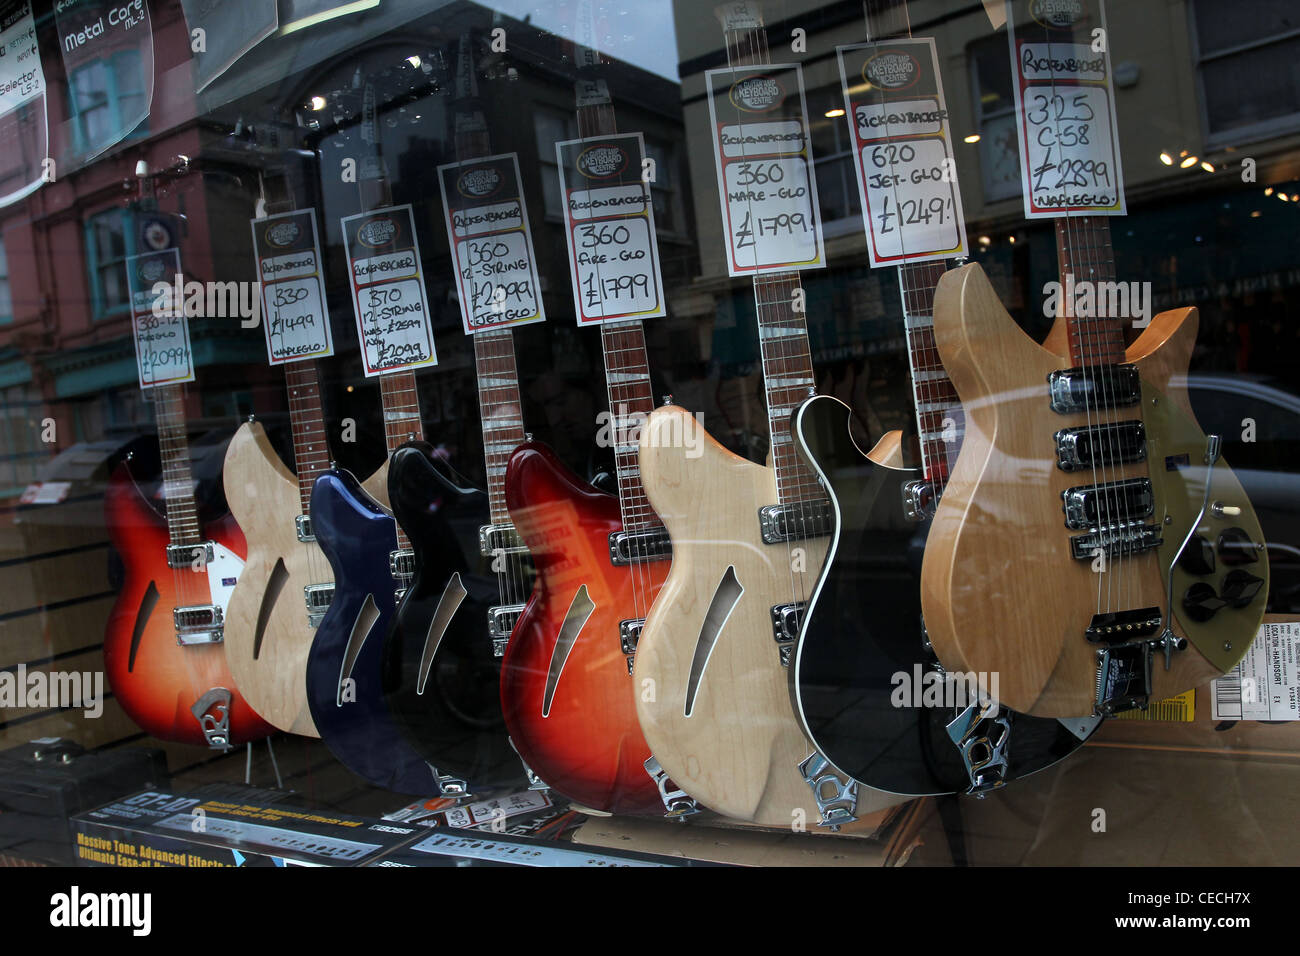 Selection of guitars pictured in 'The Guitar, Amp & Keyboard Centre' shop window in Brighton, East Sussex, UK. Stock Photo